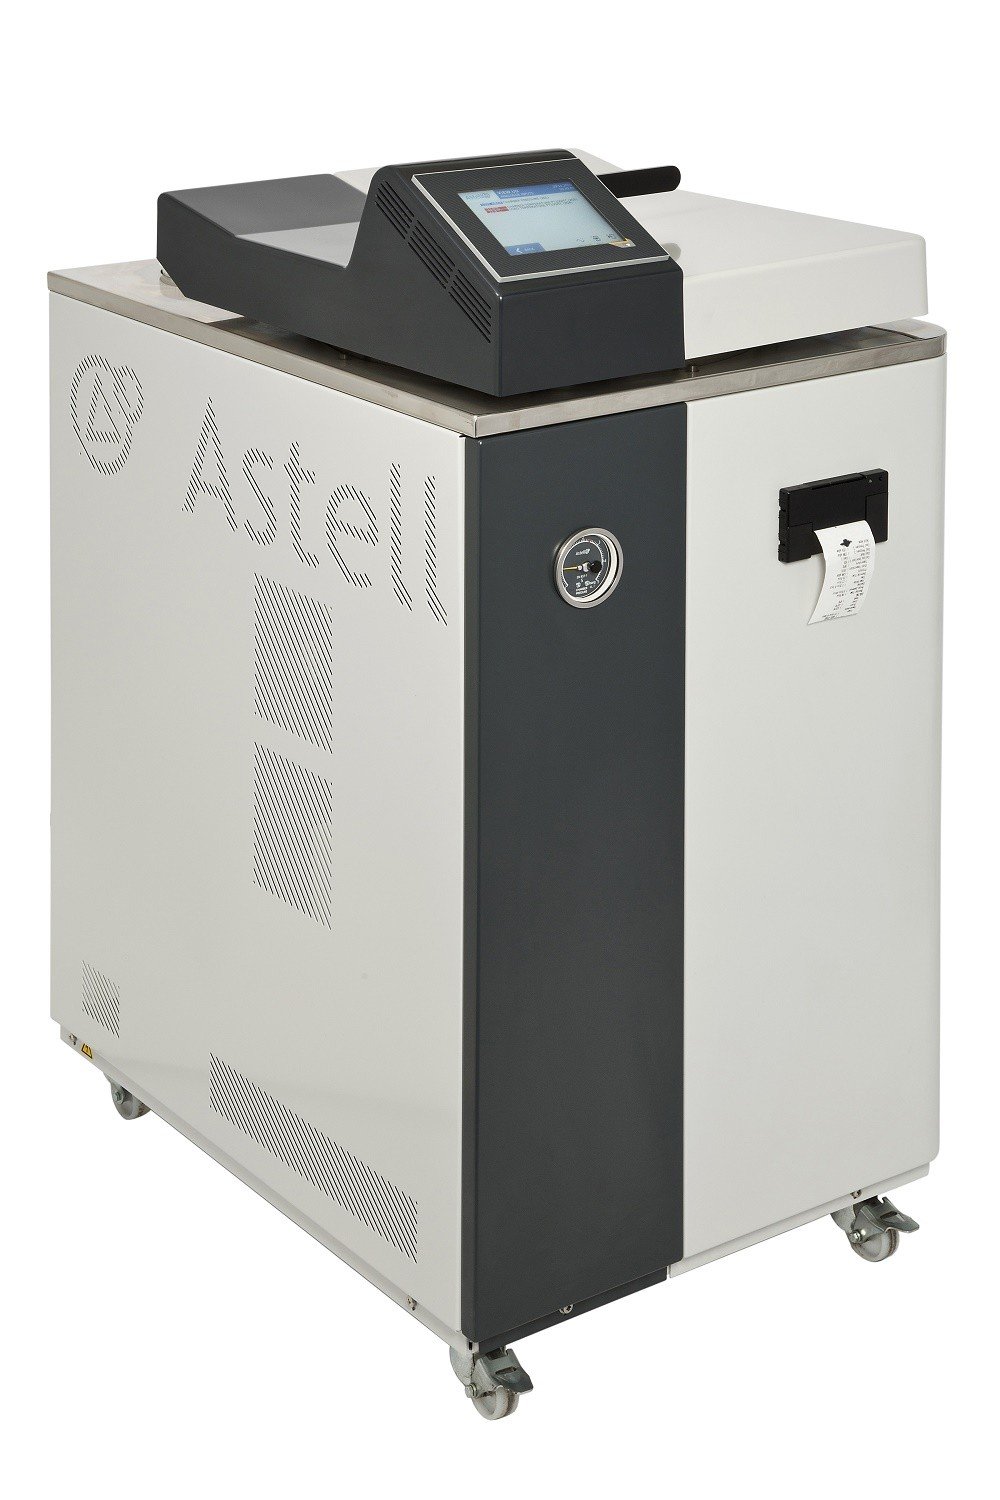 Astell Scientific AMA240BT Autofill Top Loading Compact Autoclave, 63 Litres, Heaters in Chamber, Single Phase 230 volts, 13 Amps, 50/60Hz